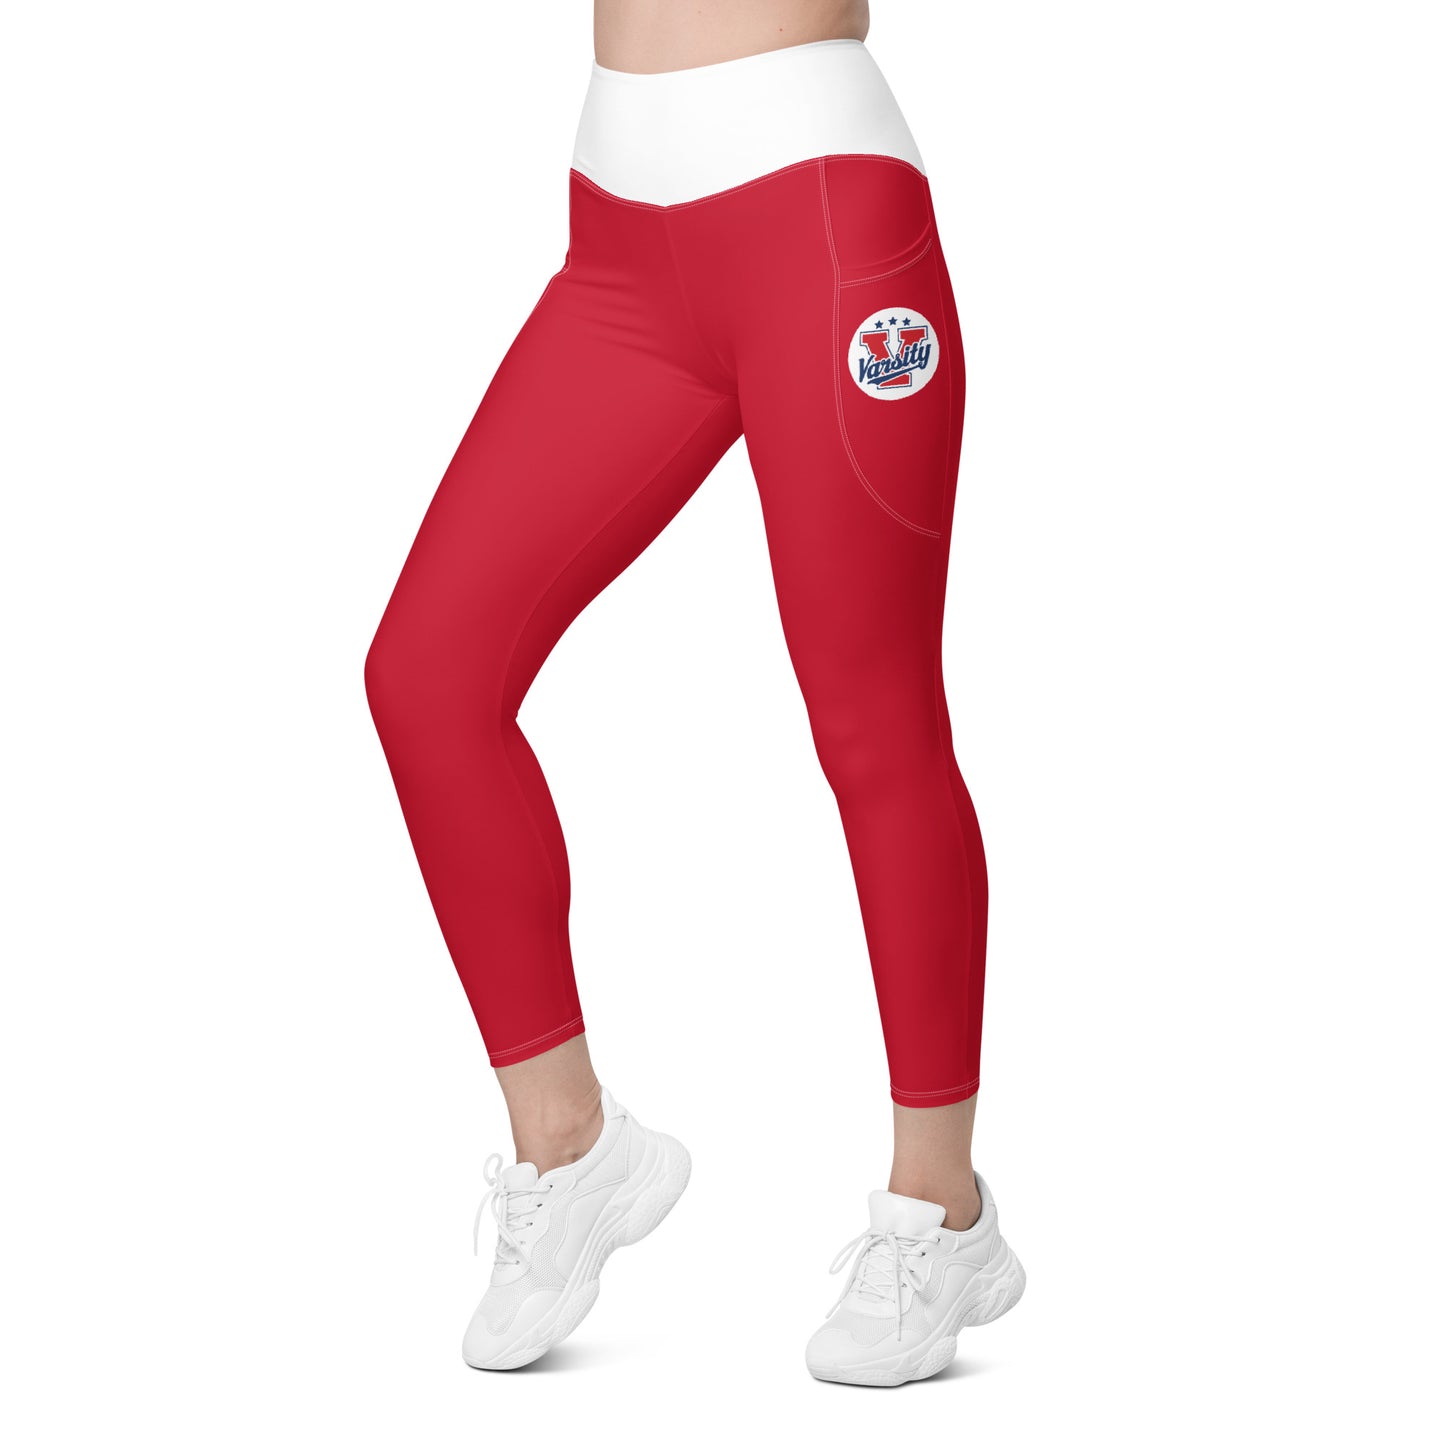 Varsity Performance Nutrition Leggings with Pockets